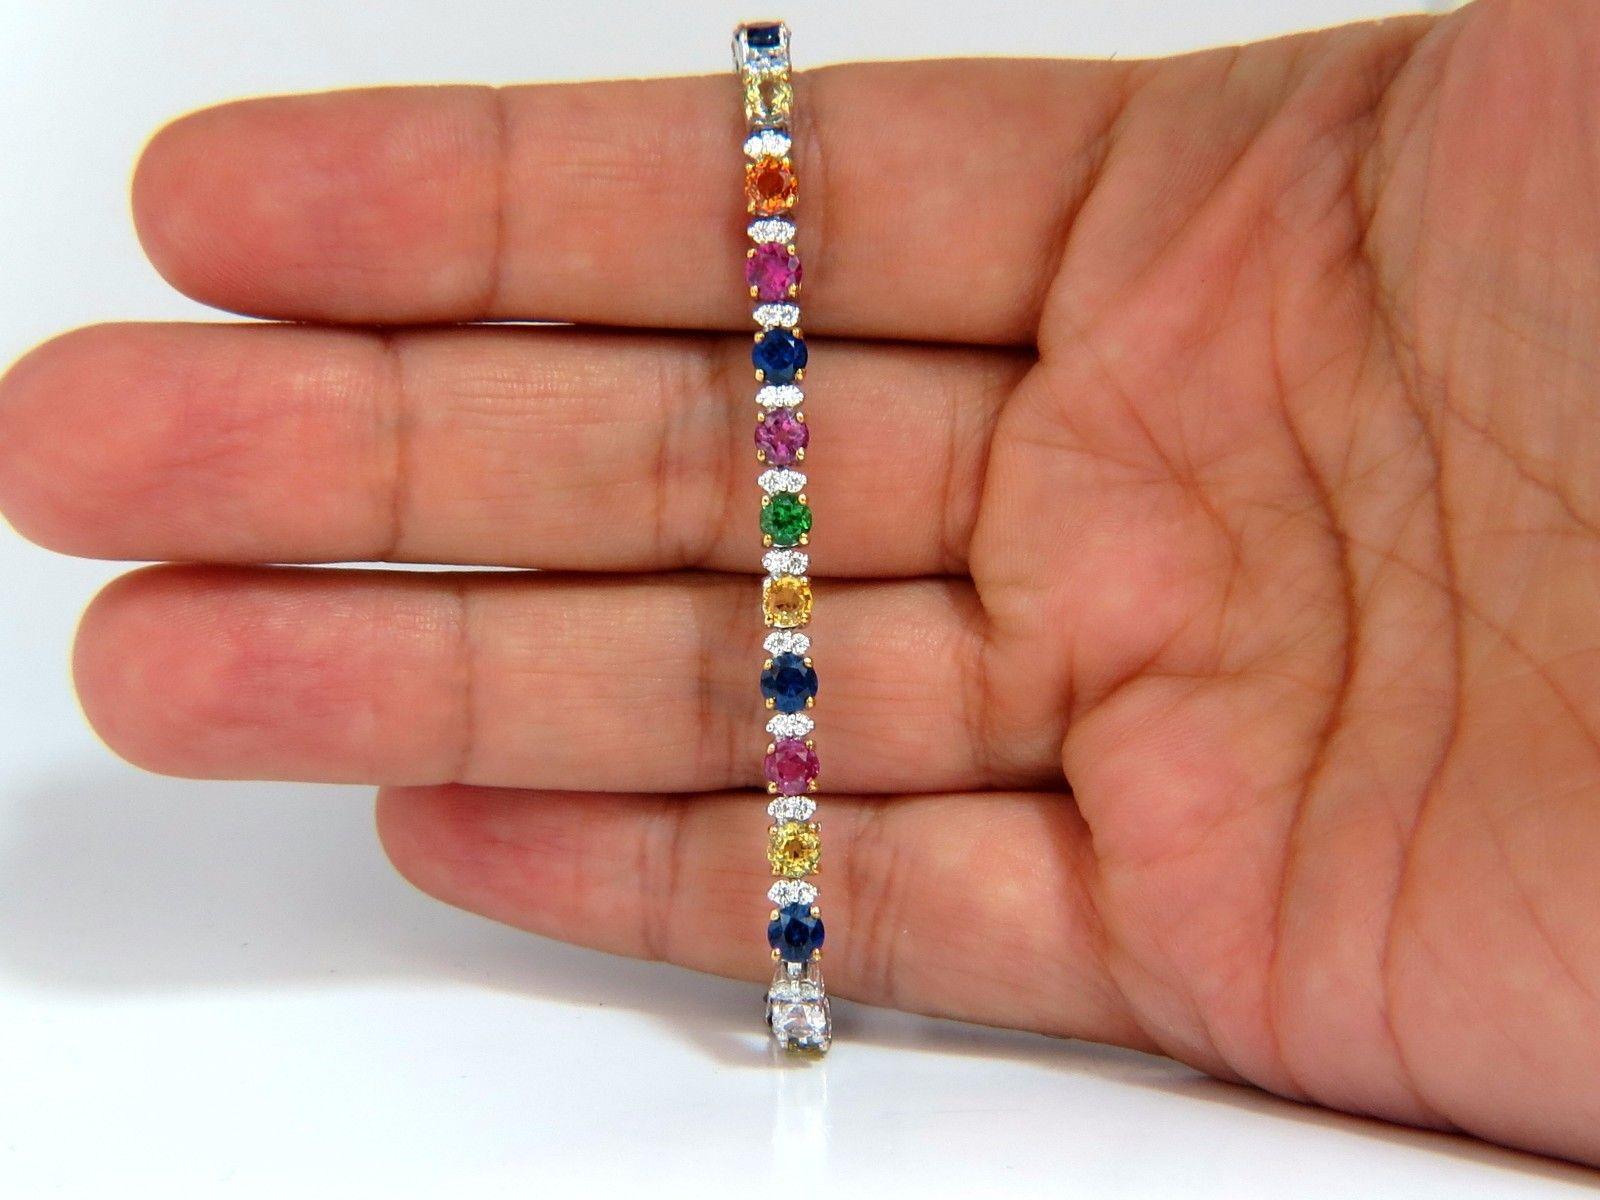 Colors Explained.

10.52ct. Natural Sapphires, Tsavorite, Emeralds

 & 1.10ct Diamonds bracelet.

Full round cuts, great sparkle.

Vibrant Greens, Orange, Reds, yellows, Blues and Pinks/

Clean Clarity & Transparent.

Diamonds: G-color Vs-2